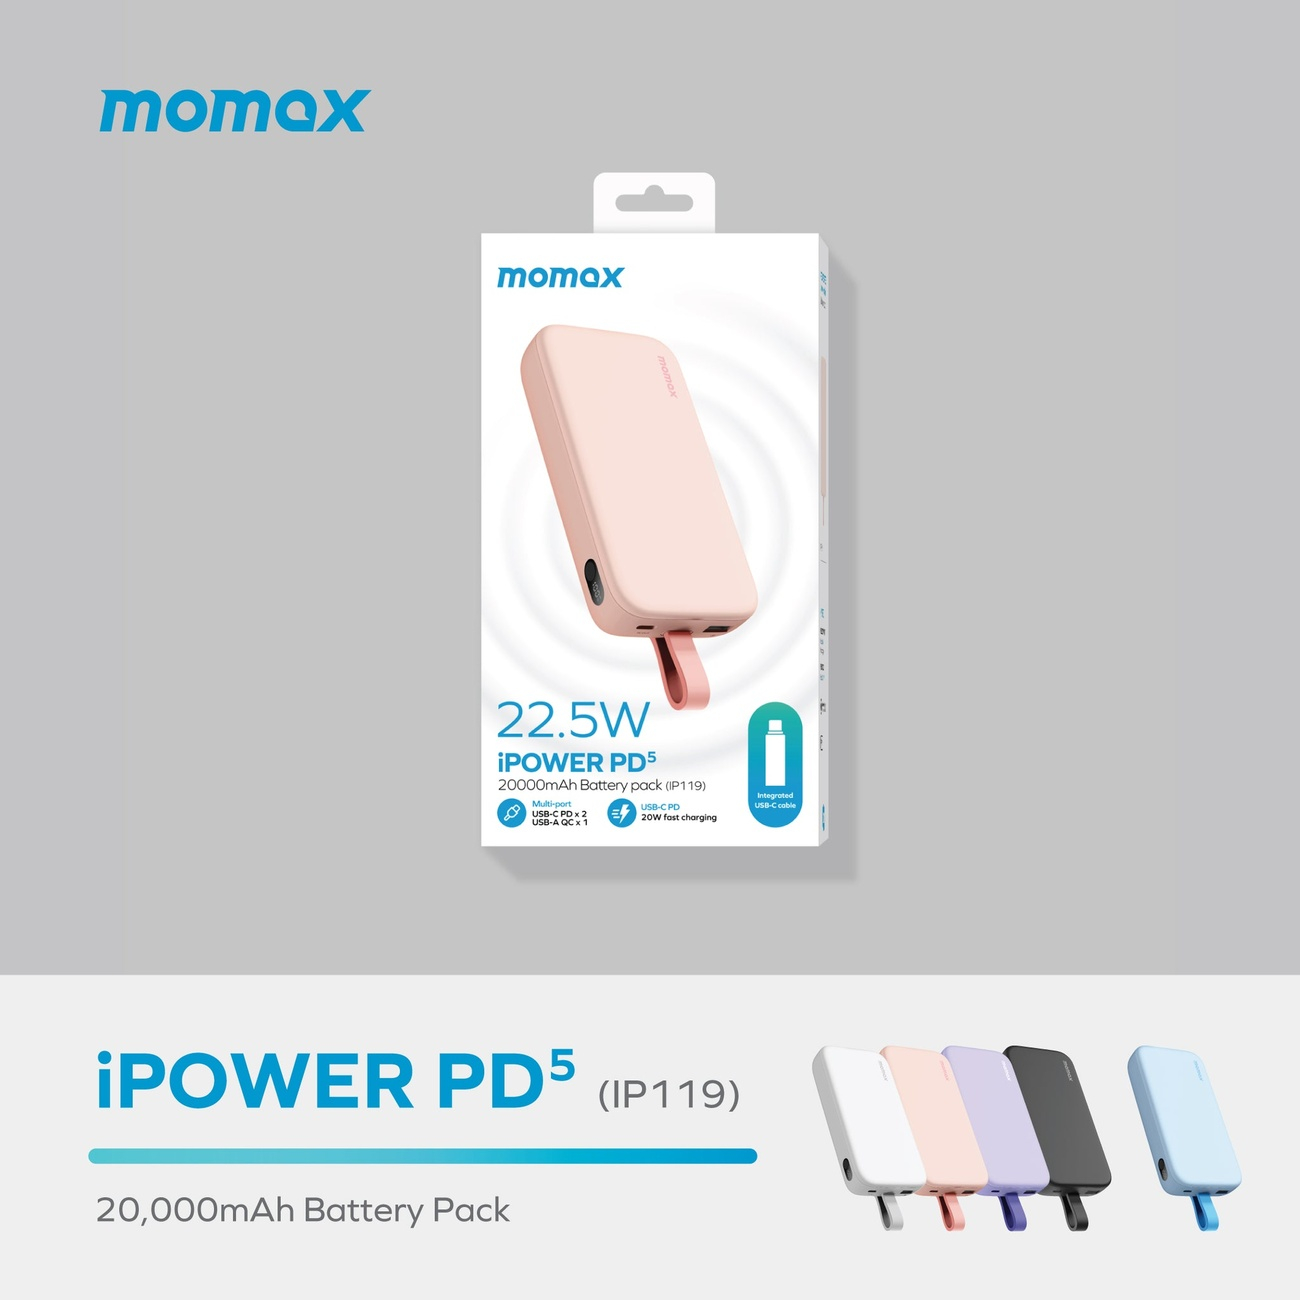 Momax iPower PD 5 Battery / 20,000mAh Capacity / Fast Charging / Built-in  Type-C Cable / Black in Qatar